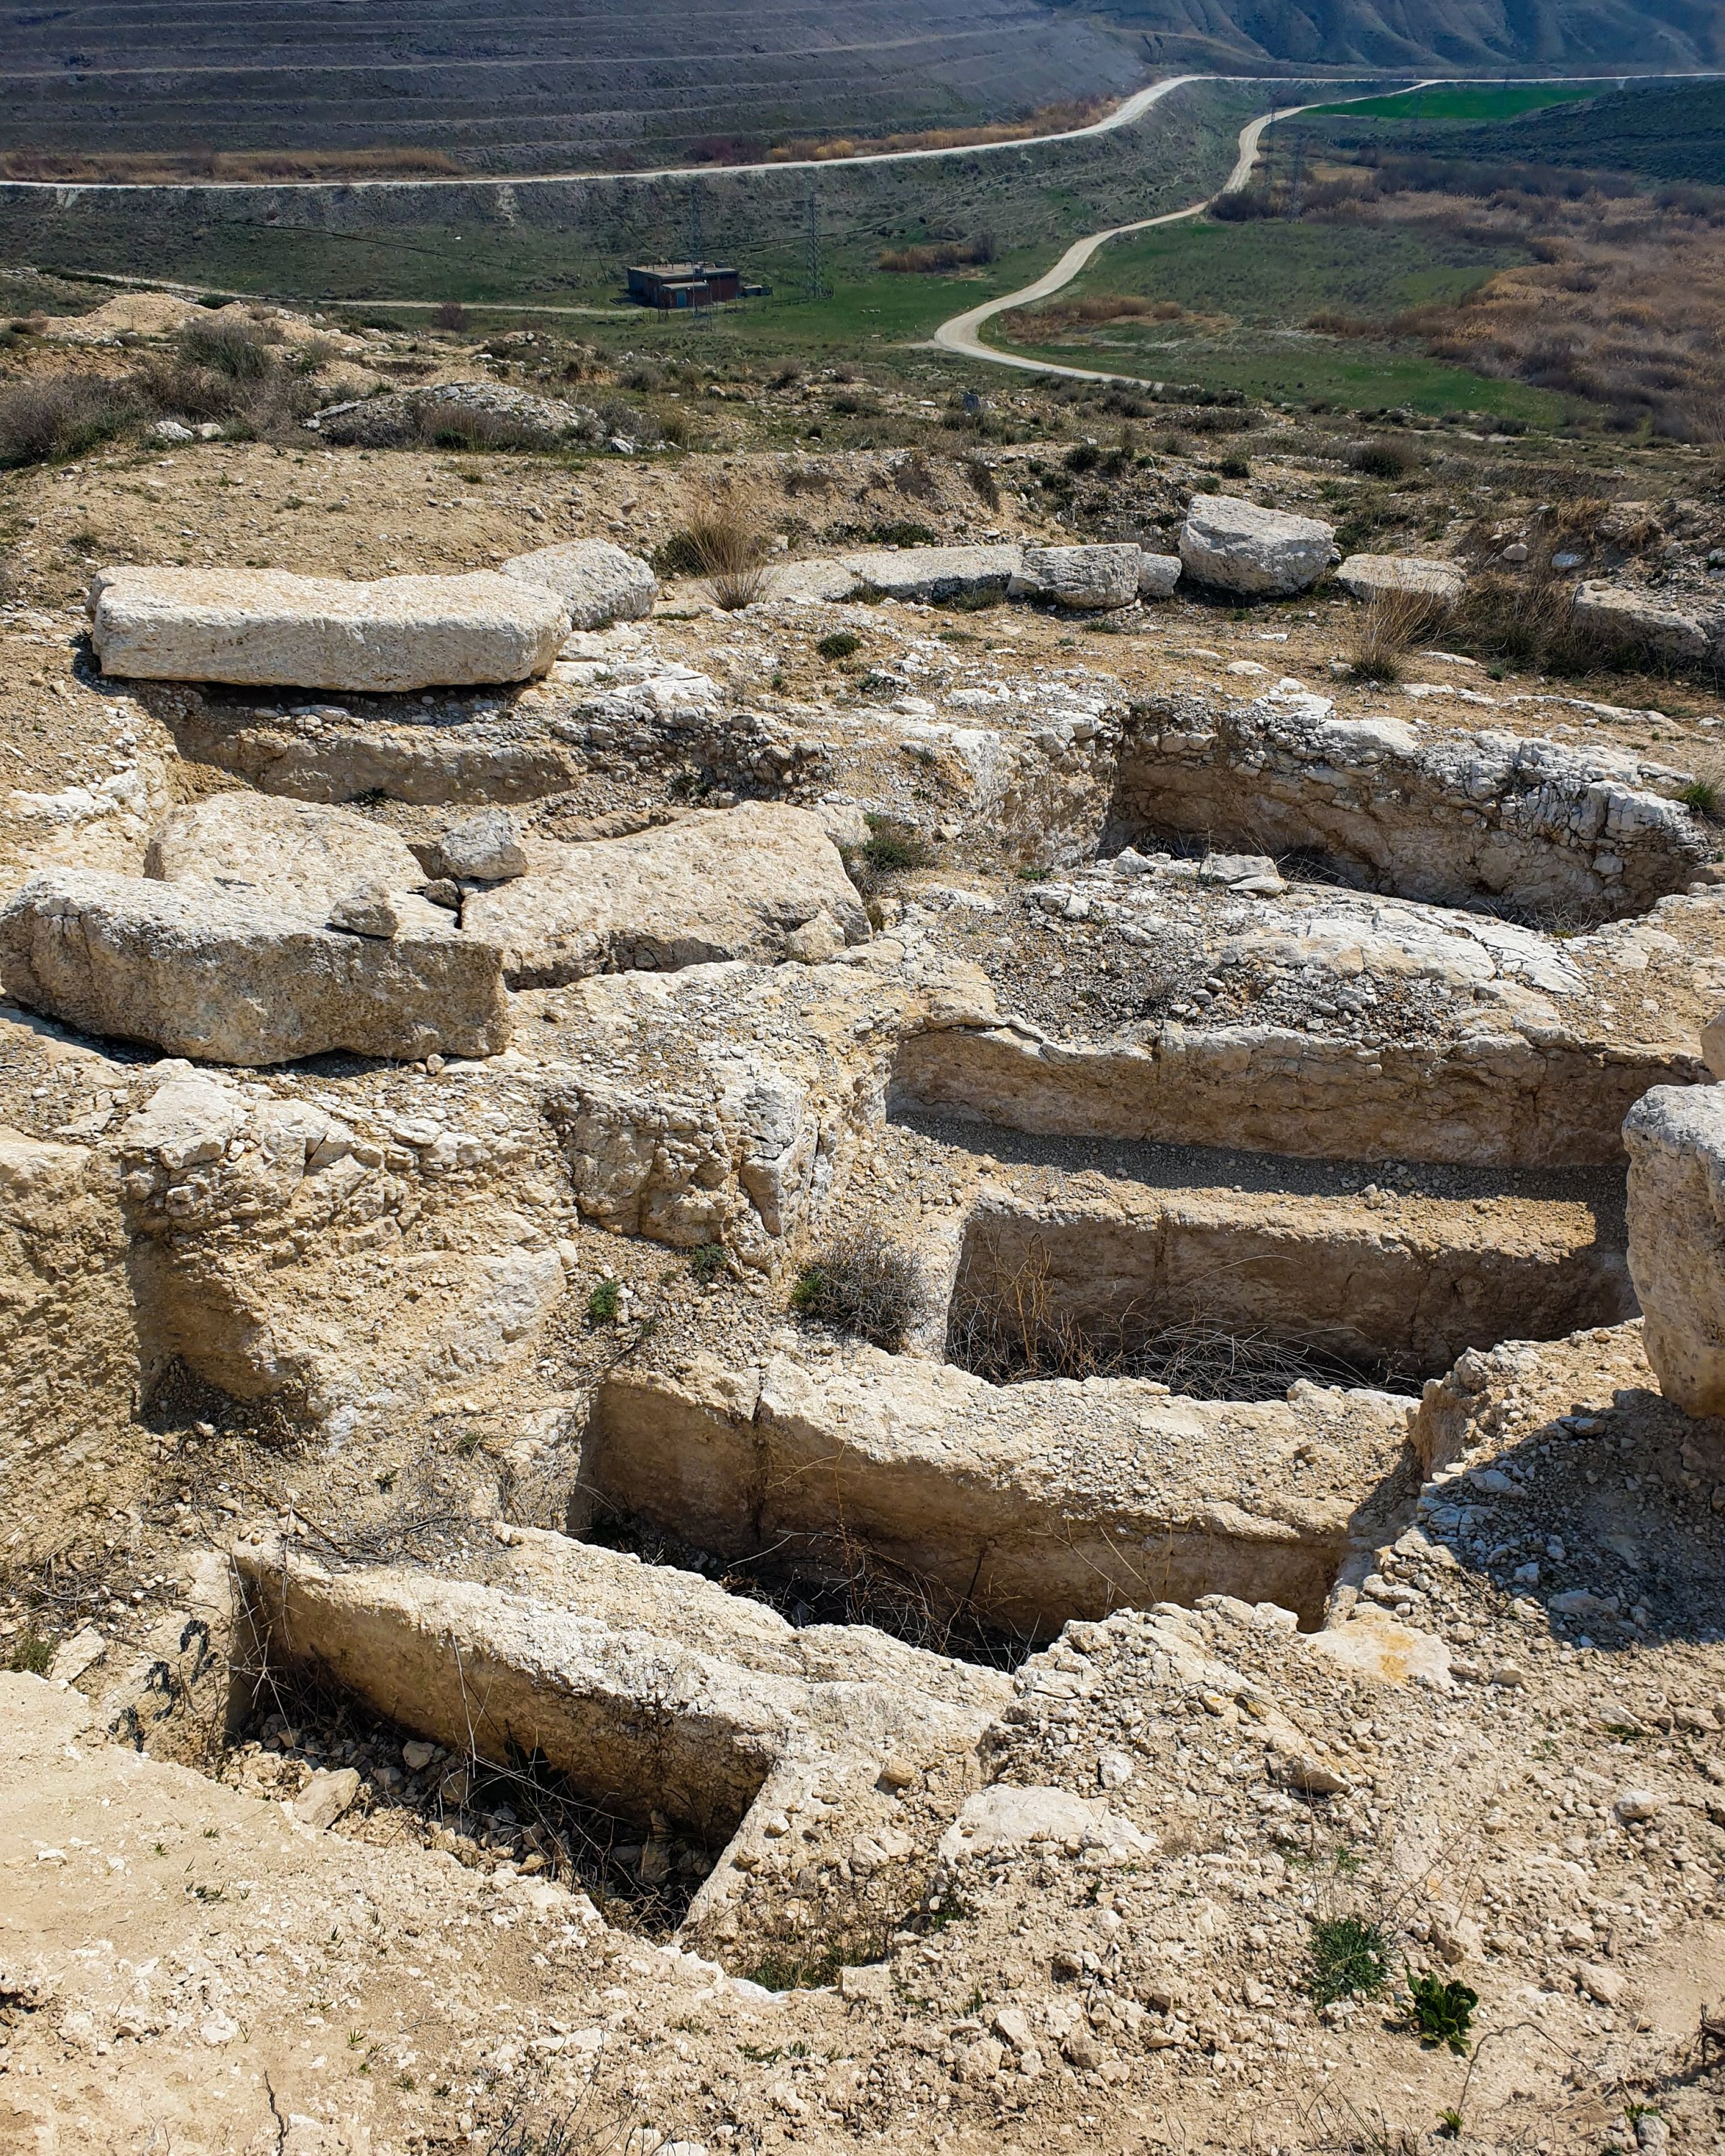 The southeast sides of the Juliopolis Necropolis houses many remains of ancient walls and structures. (Photo by Argun Konuk)